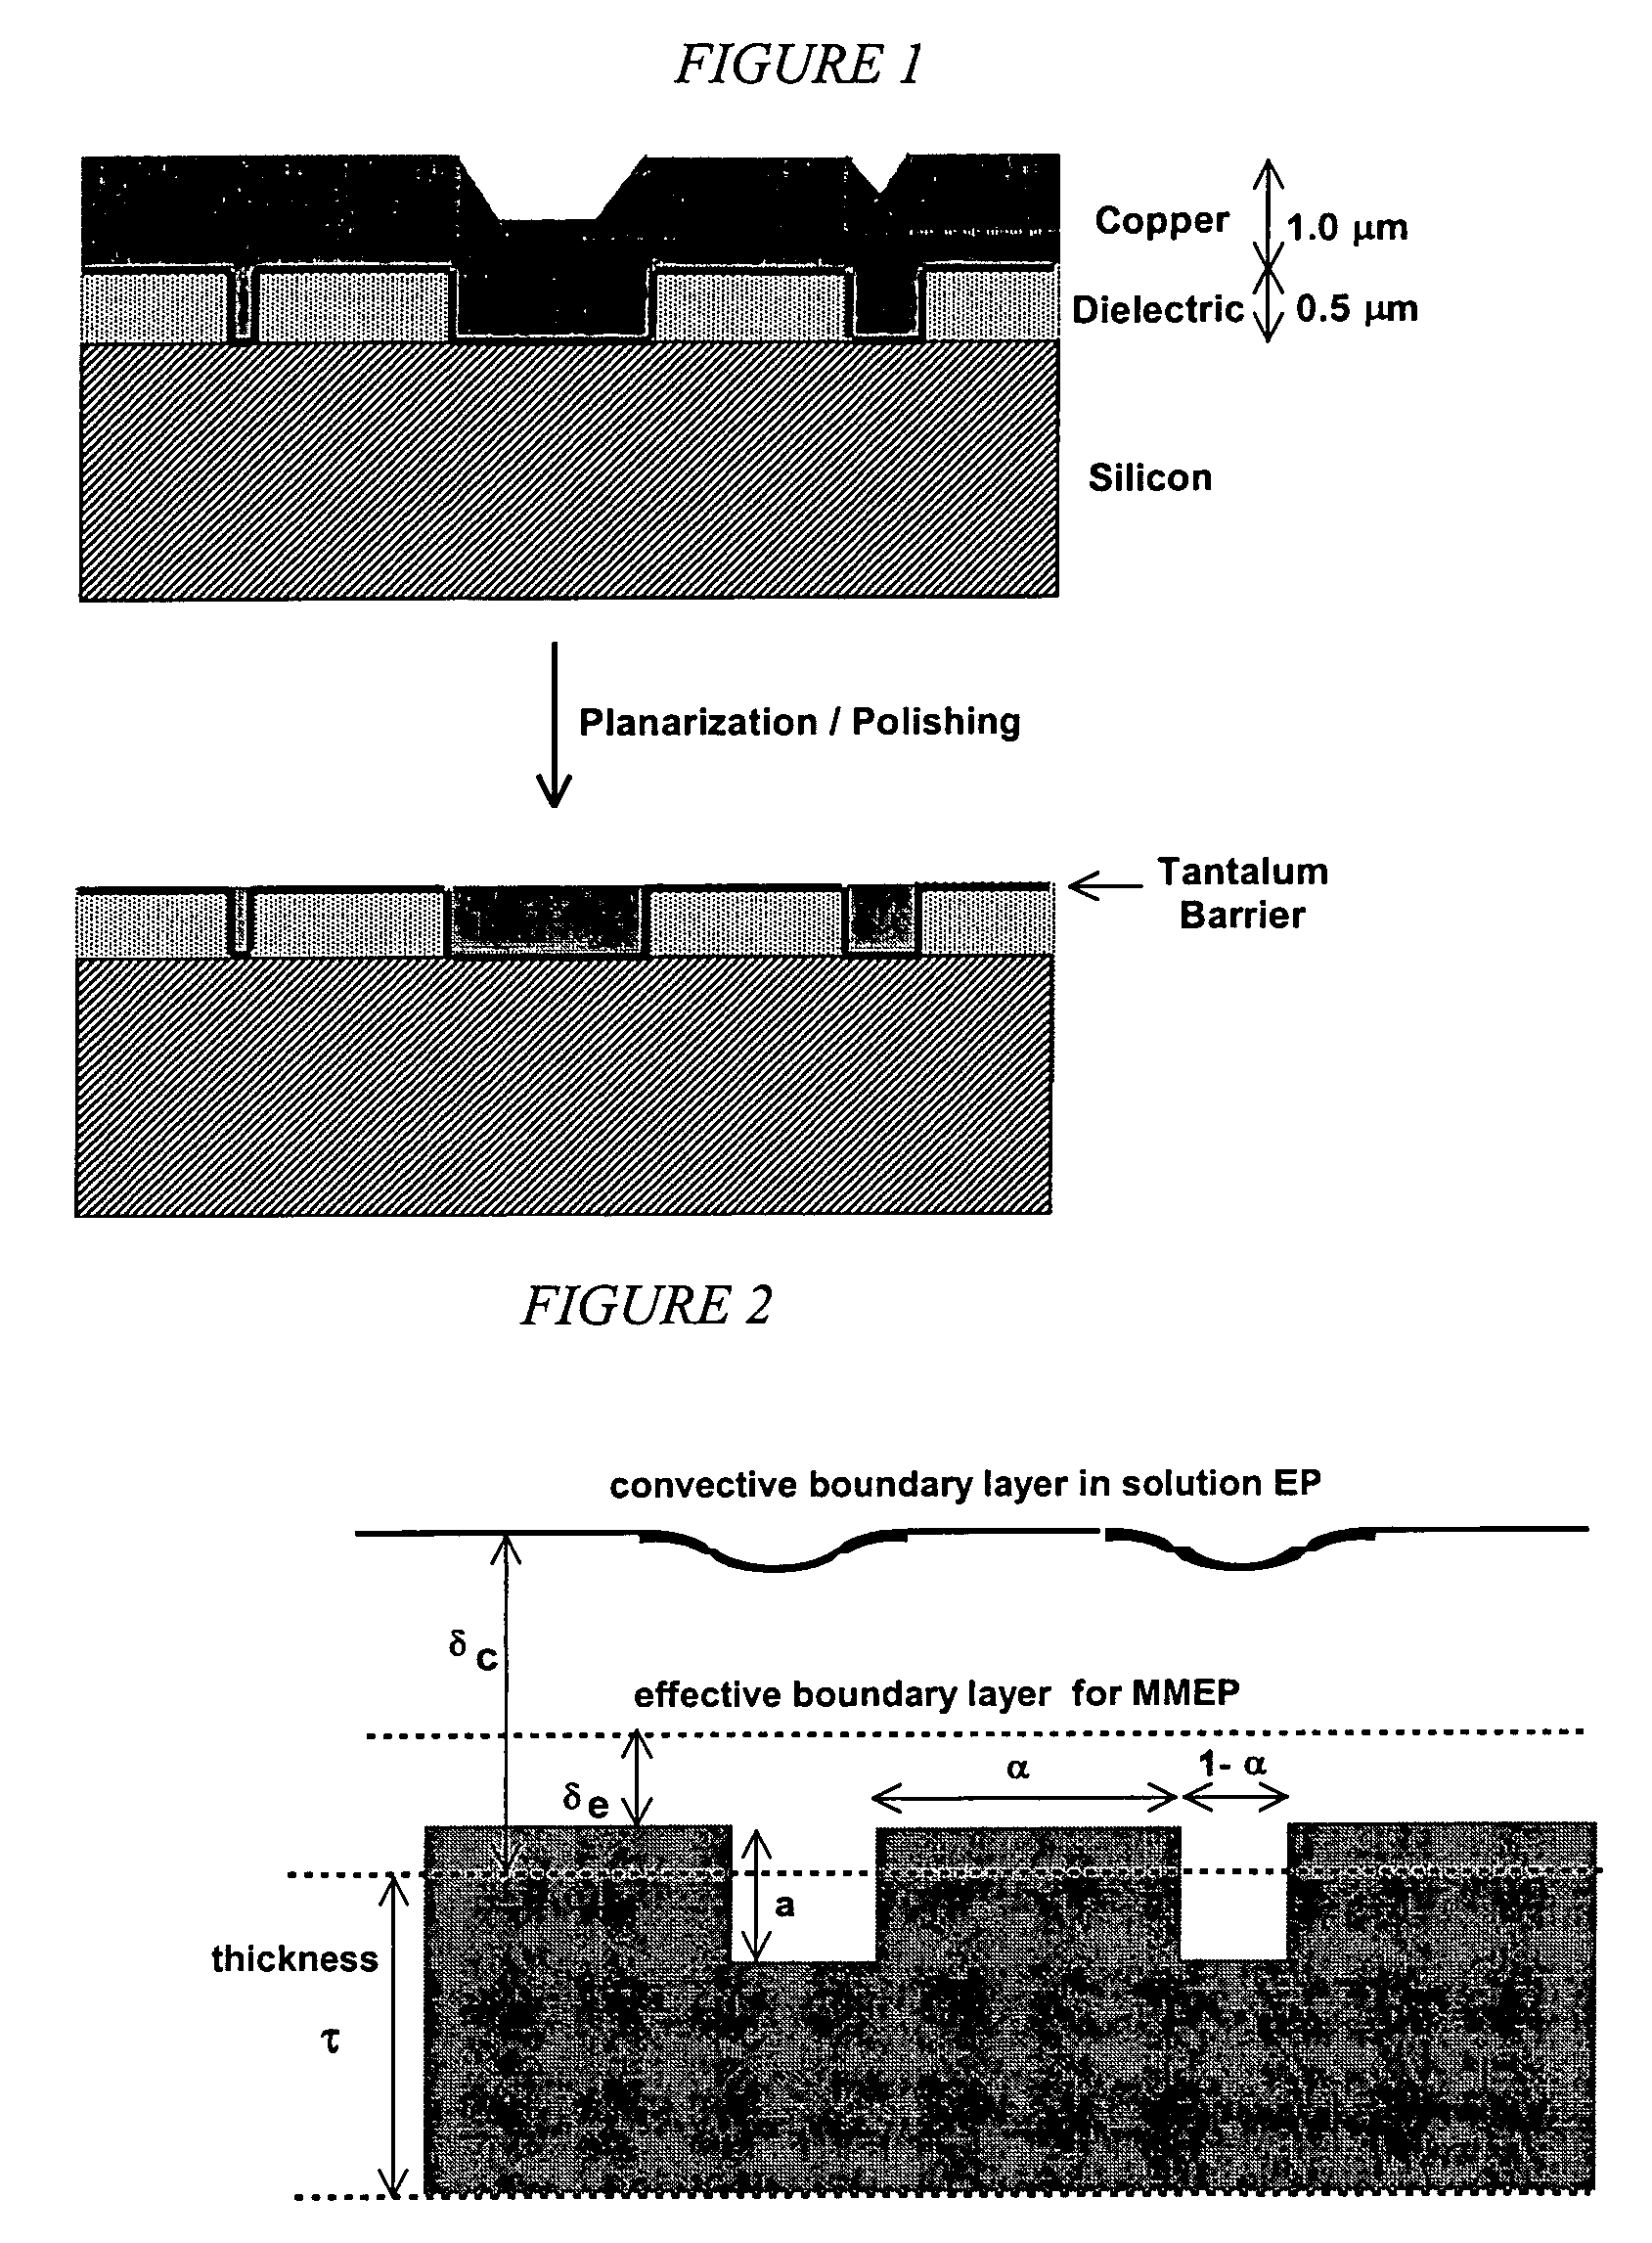 Apparatus adapted for membrane-mediated electropolishing